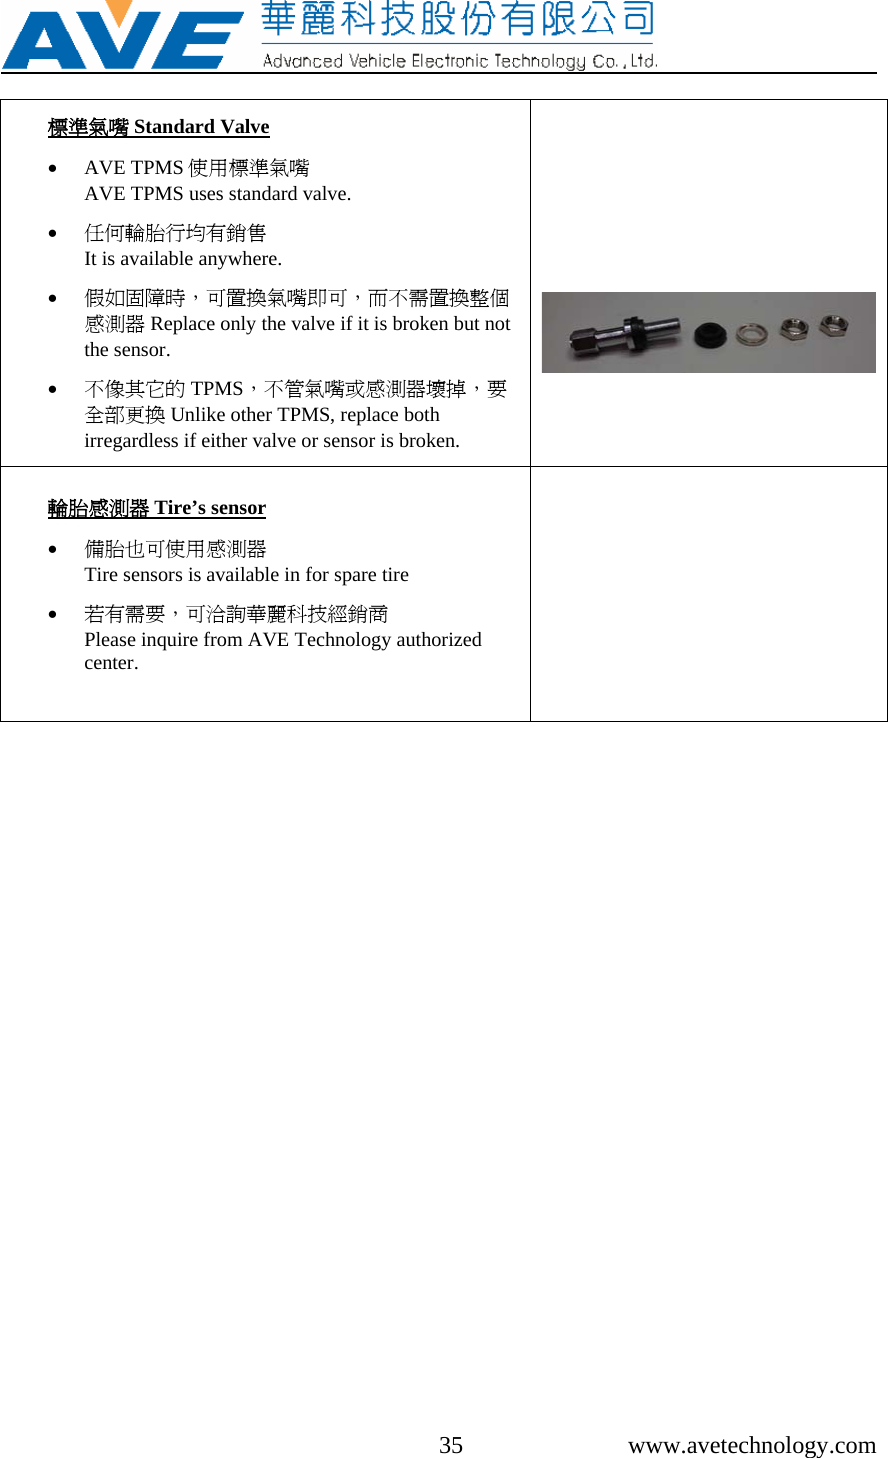     35 www.avetechnology.com  標準氣嘴 Standard Valve  • AVE TPMS 使用標準氣嘴                                  AVE TPMS uses standard valve.  • 任何輪胎行均有銷售                                                It is available anywhere.   • 假如固障時，可置換氣嘴即可，而不需置換整個感測器 Replace only the valve if it is broken but not the sensor.  • 不像其它的 TPMS，不管氣嘴或感測器壞掉，要全部更換 Unlike other TPMS, replace both irregardless if either valve or sensor is broken.         輪胎感測器 Tire’s sensor  • 備胎也可使用感測器                                                  Tire sensors is available in for spare tire   • 若有需要，可洽詢華麗科技經銷商                           Please inquire from AVE Technology authorized center.     